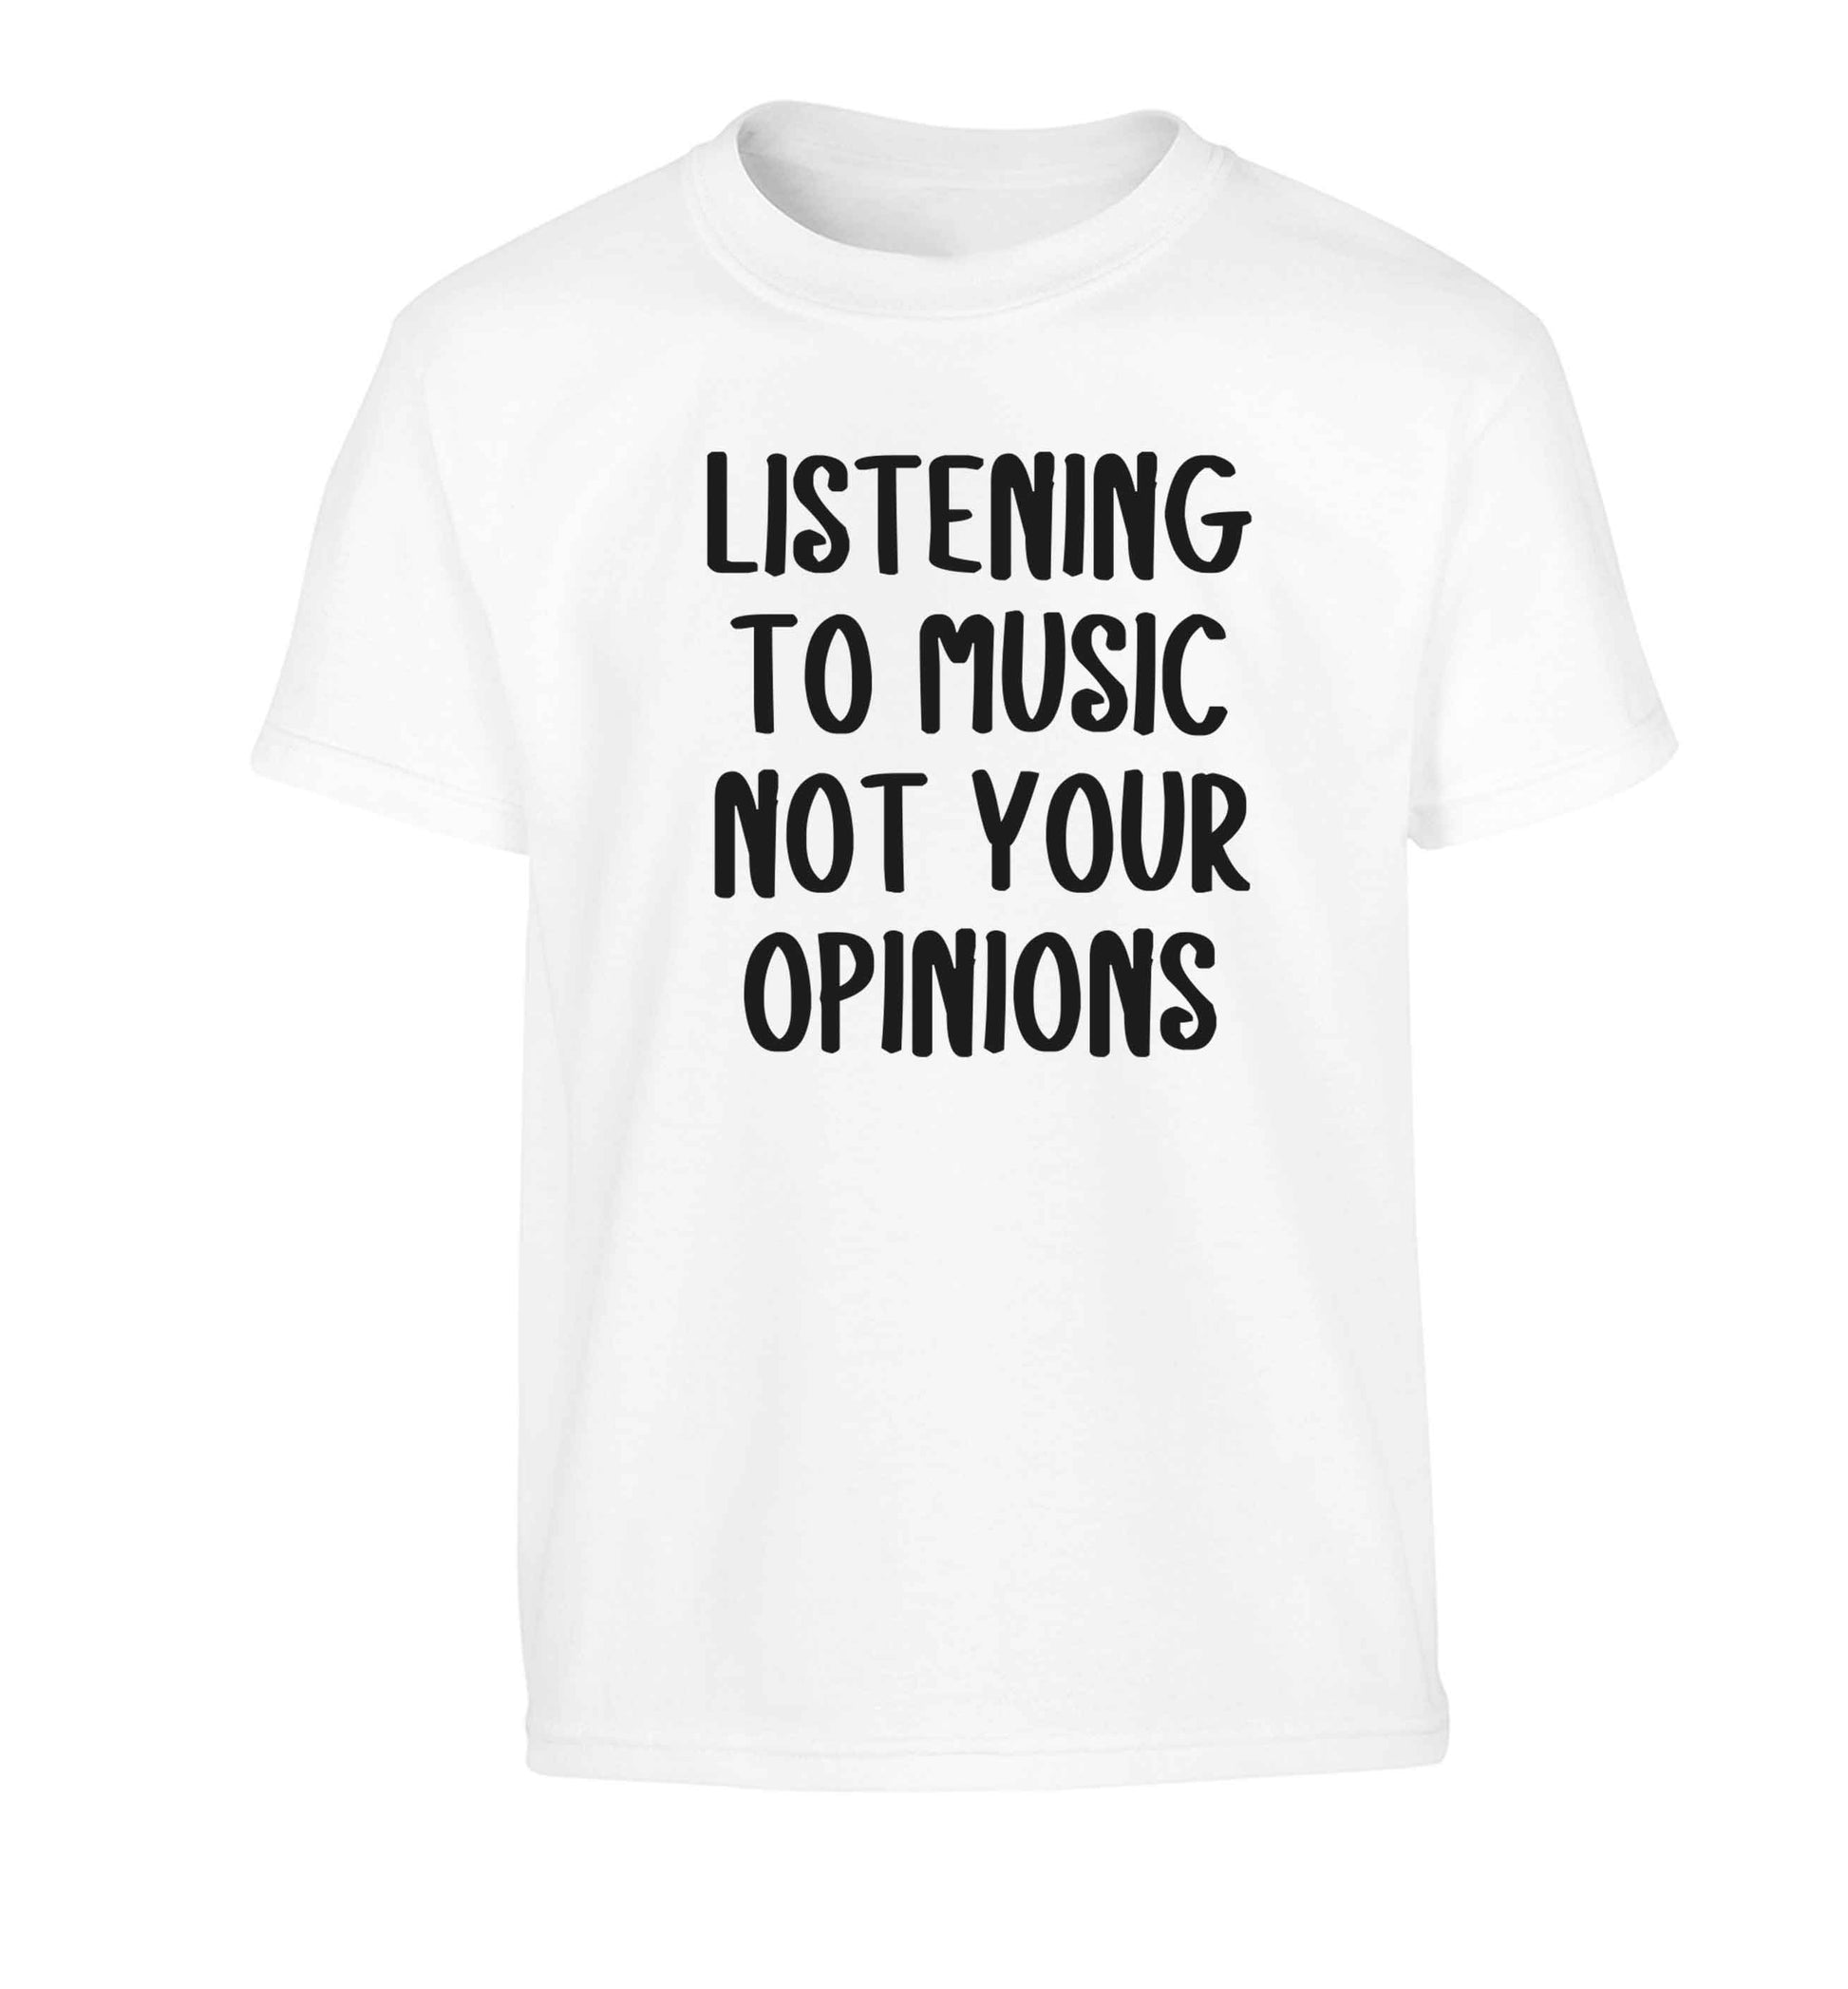 Listening to music not your opinions Children's white Tshirt 12-13 Years